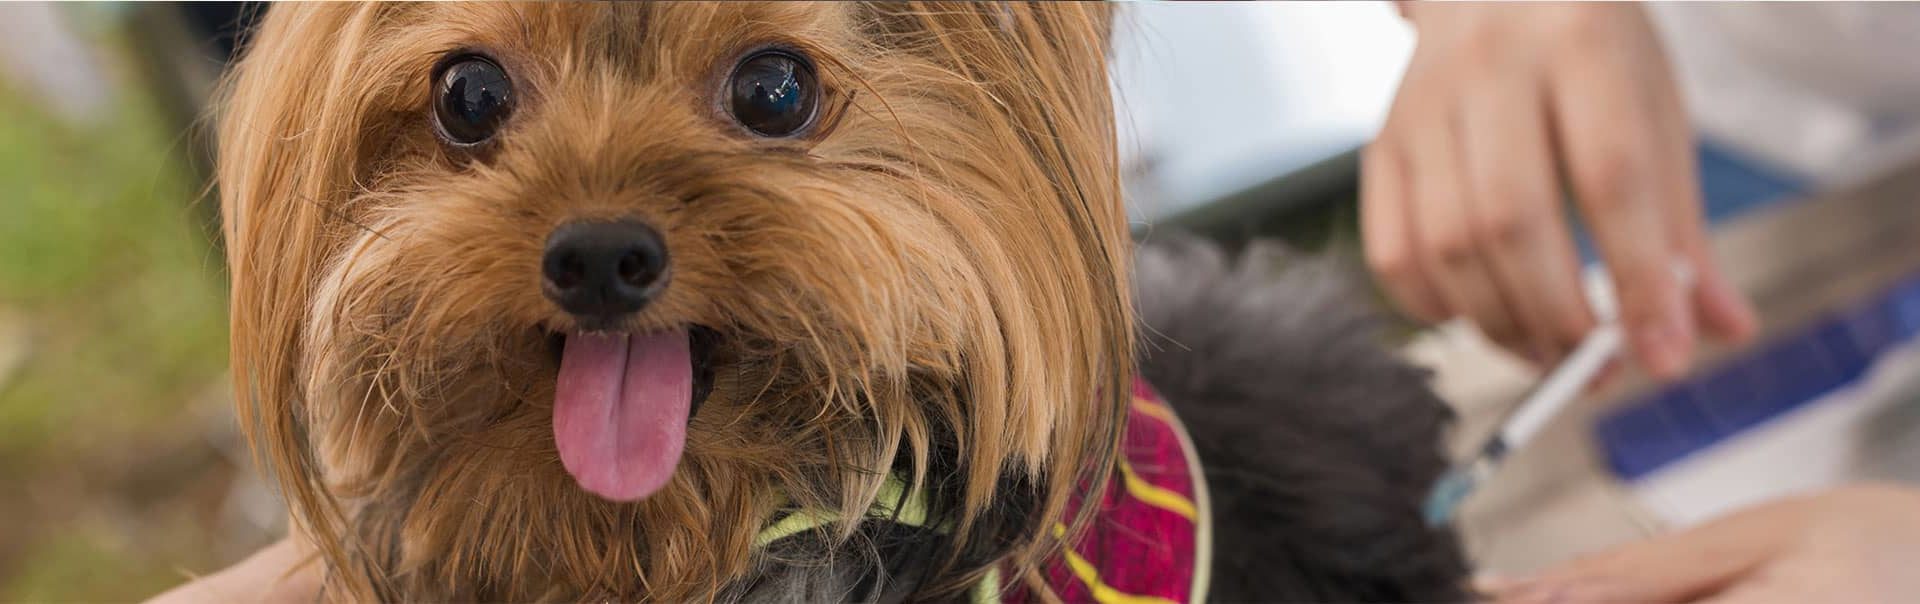 Cute Yorkshire Terrier receives a vaccination